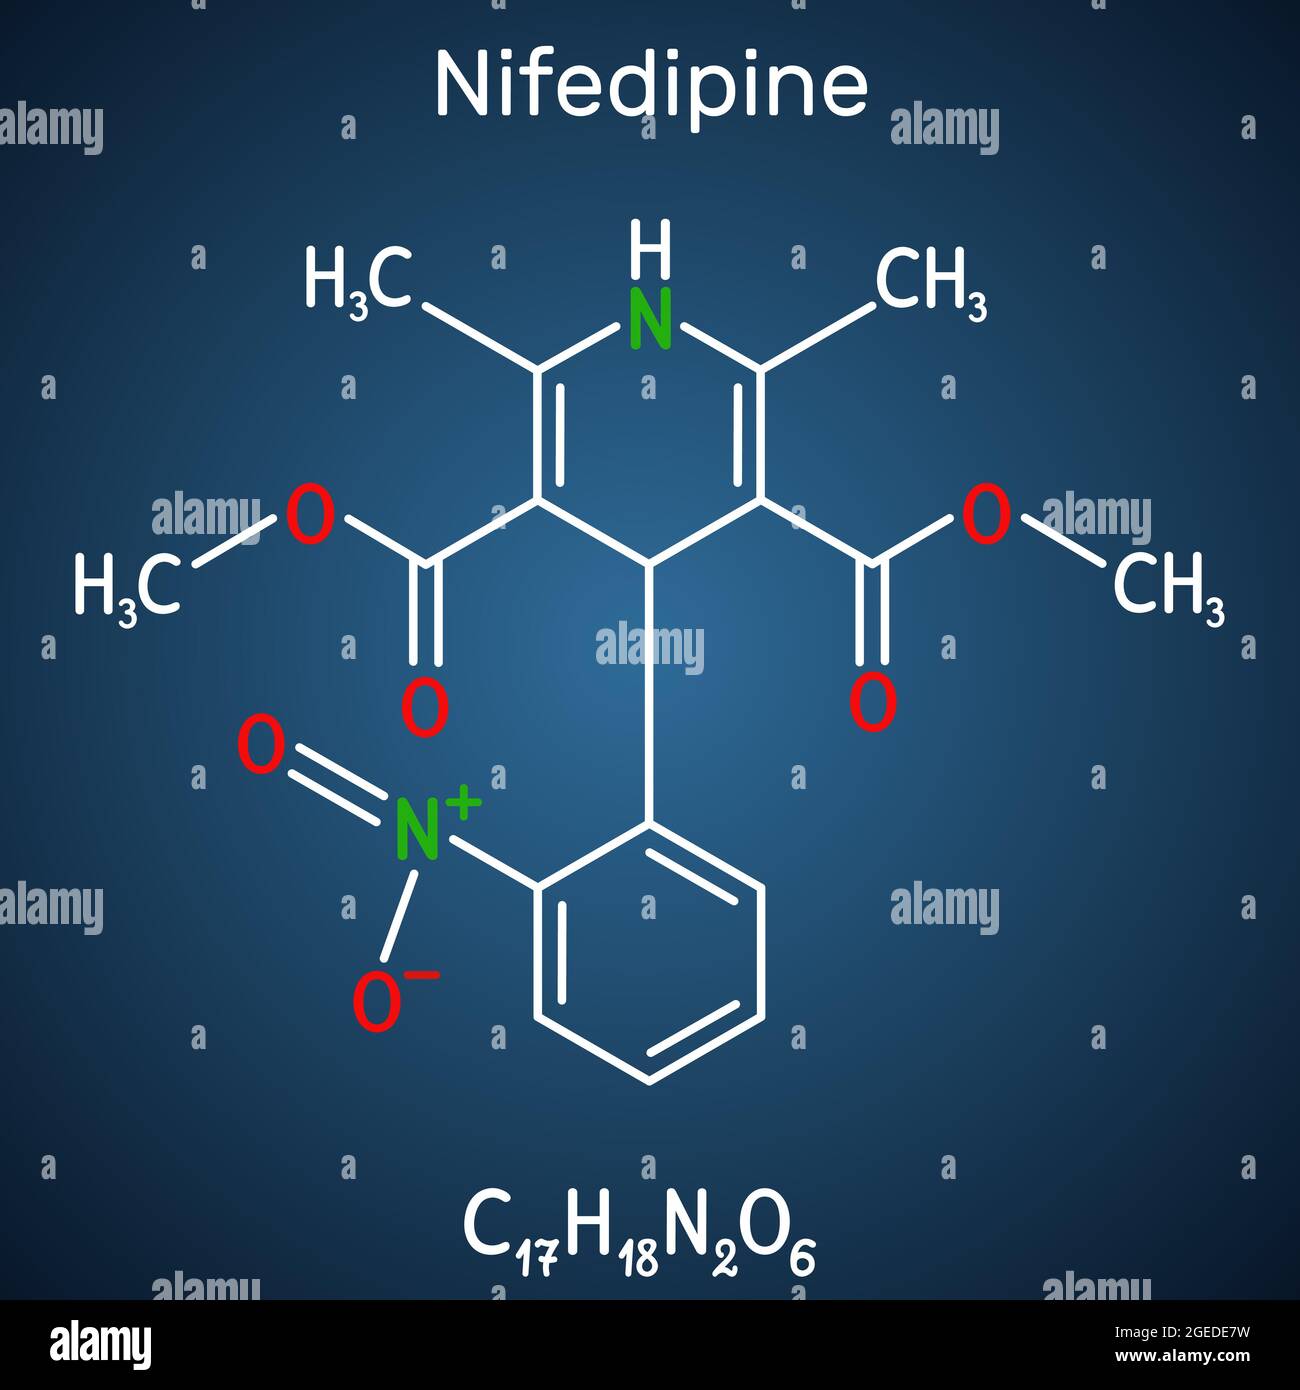 Nifedipine, molecule. It is dihydropyridine calcium channel blocking agent. Structural chemical formula on the dark blue background Stock Vector